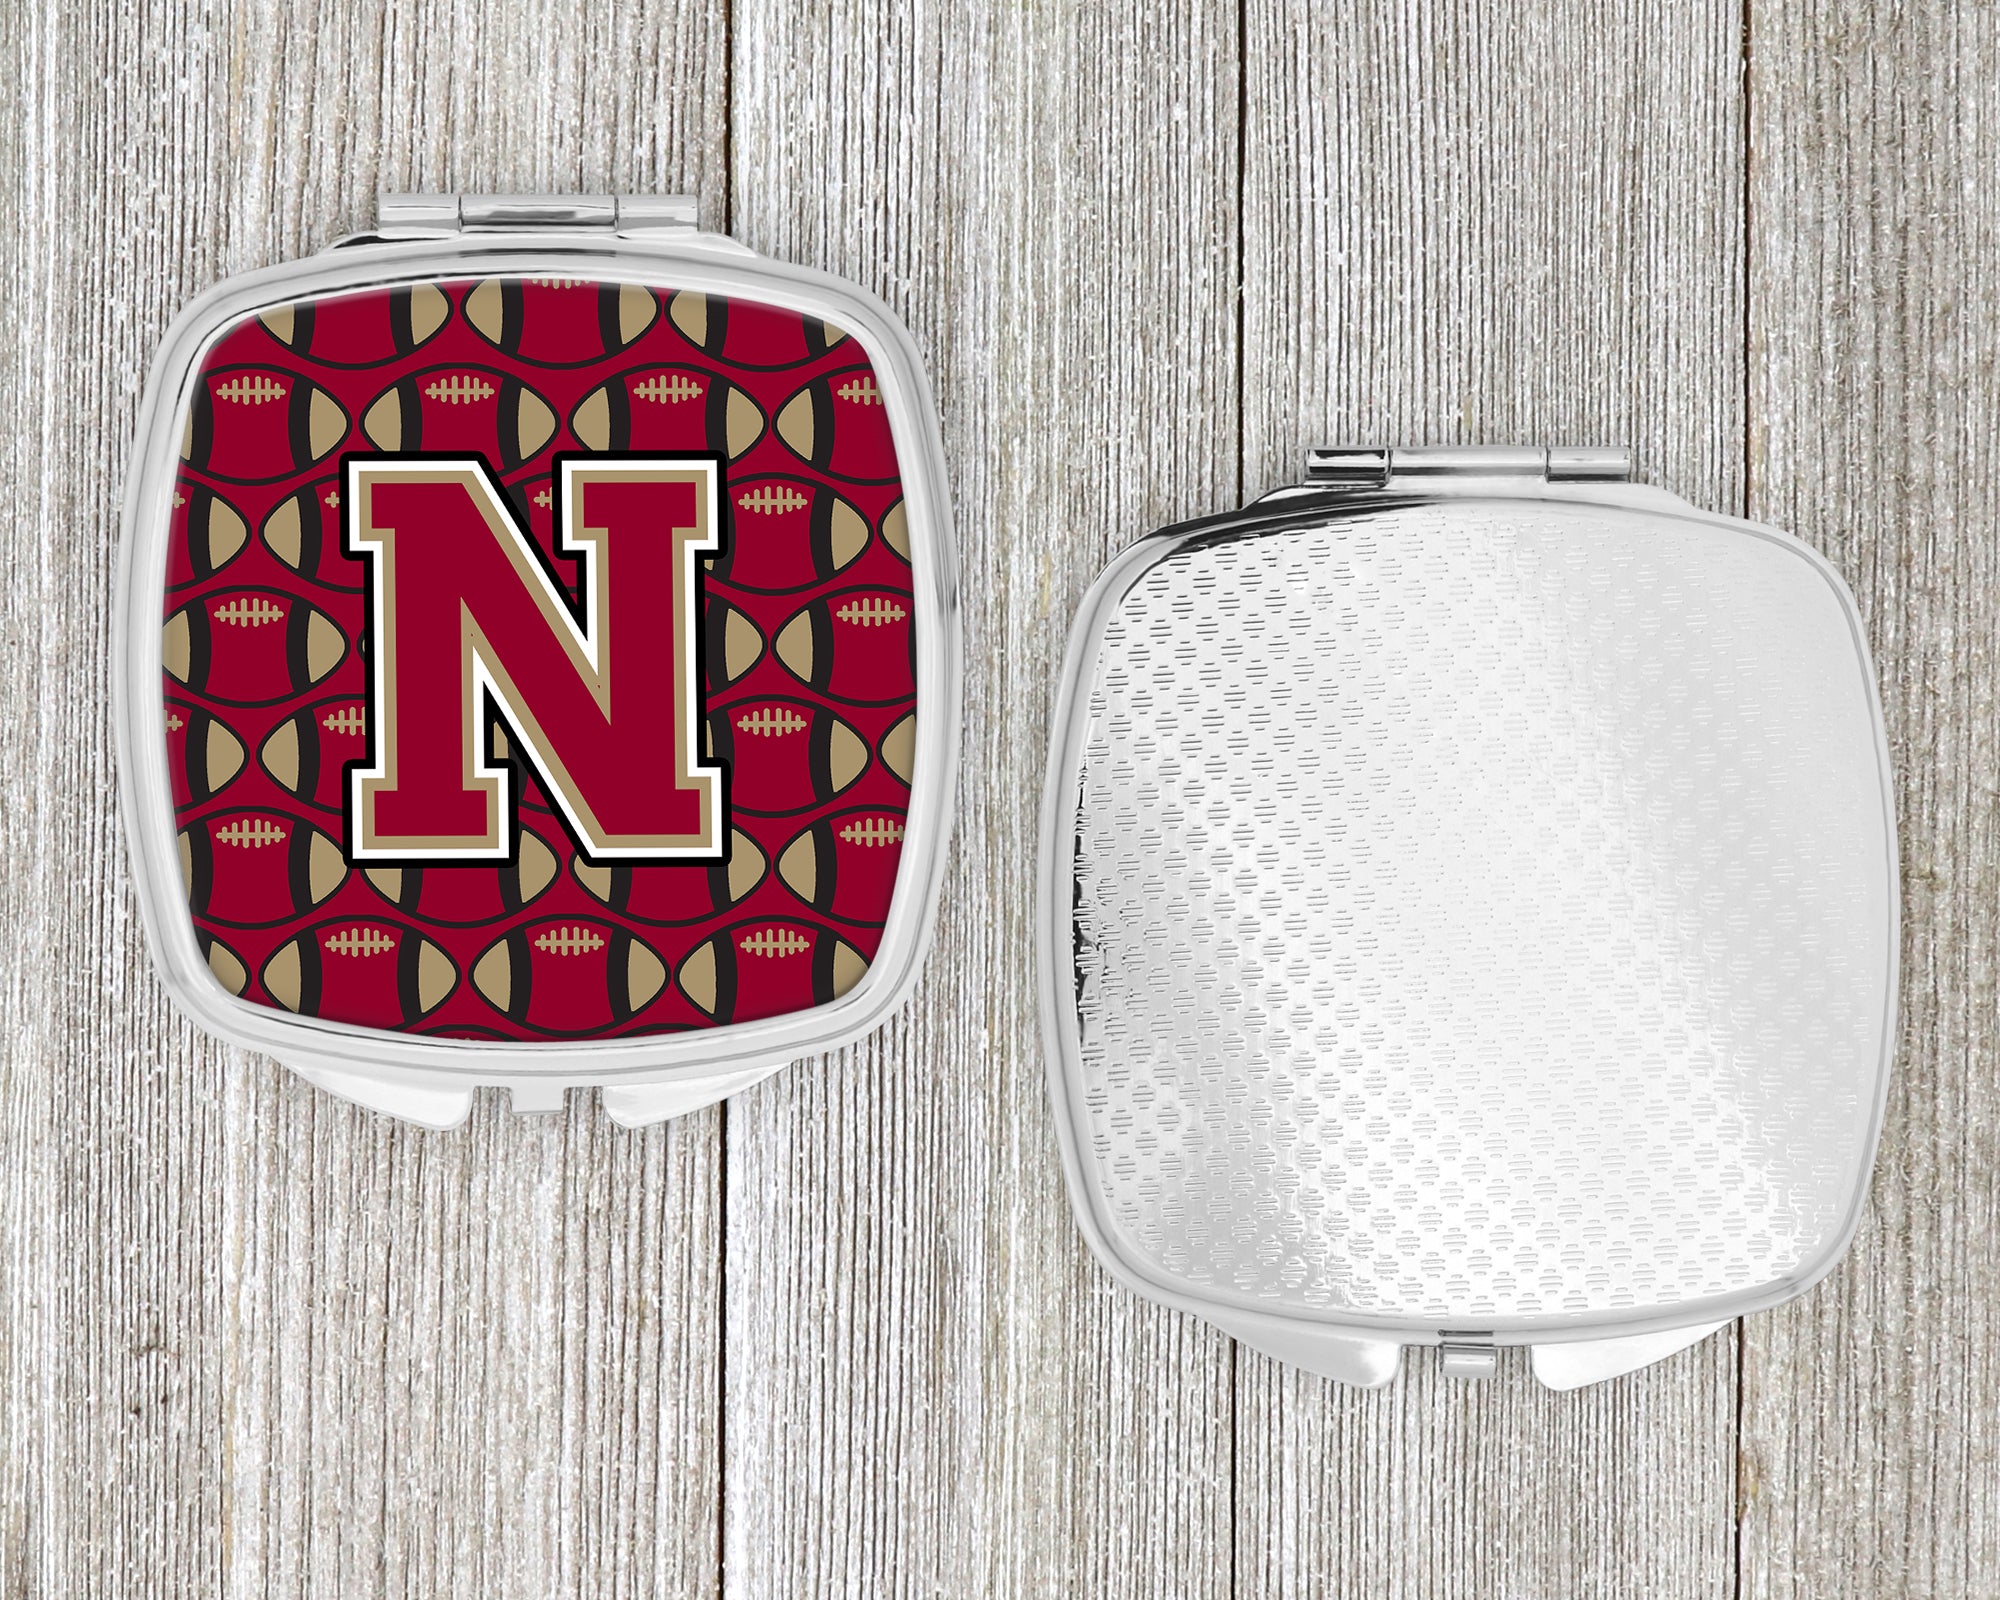 Letter N Football Garnet and Gold Compact Mirror CJ1078-NSCM  the-store.com.